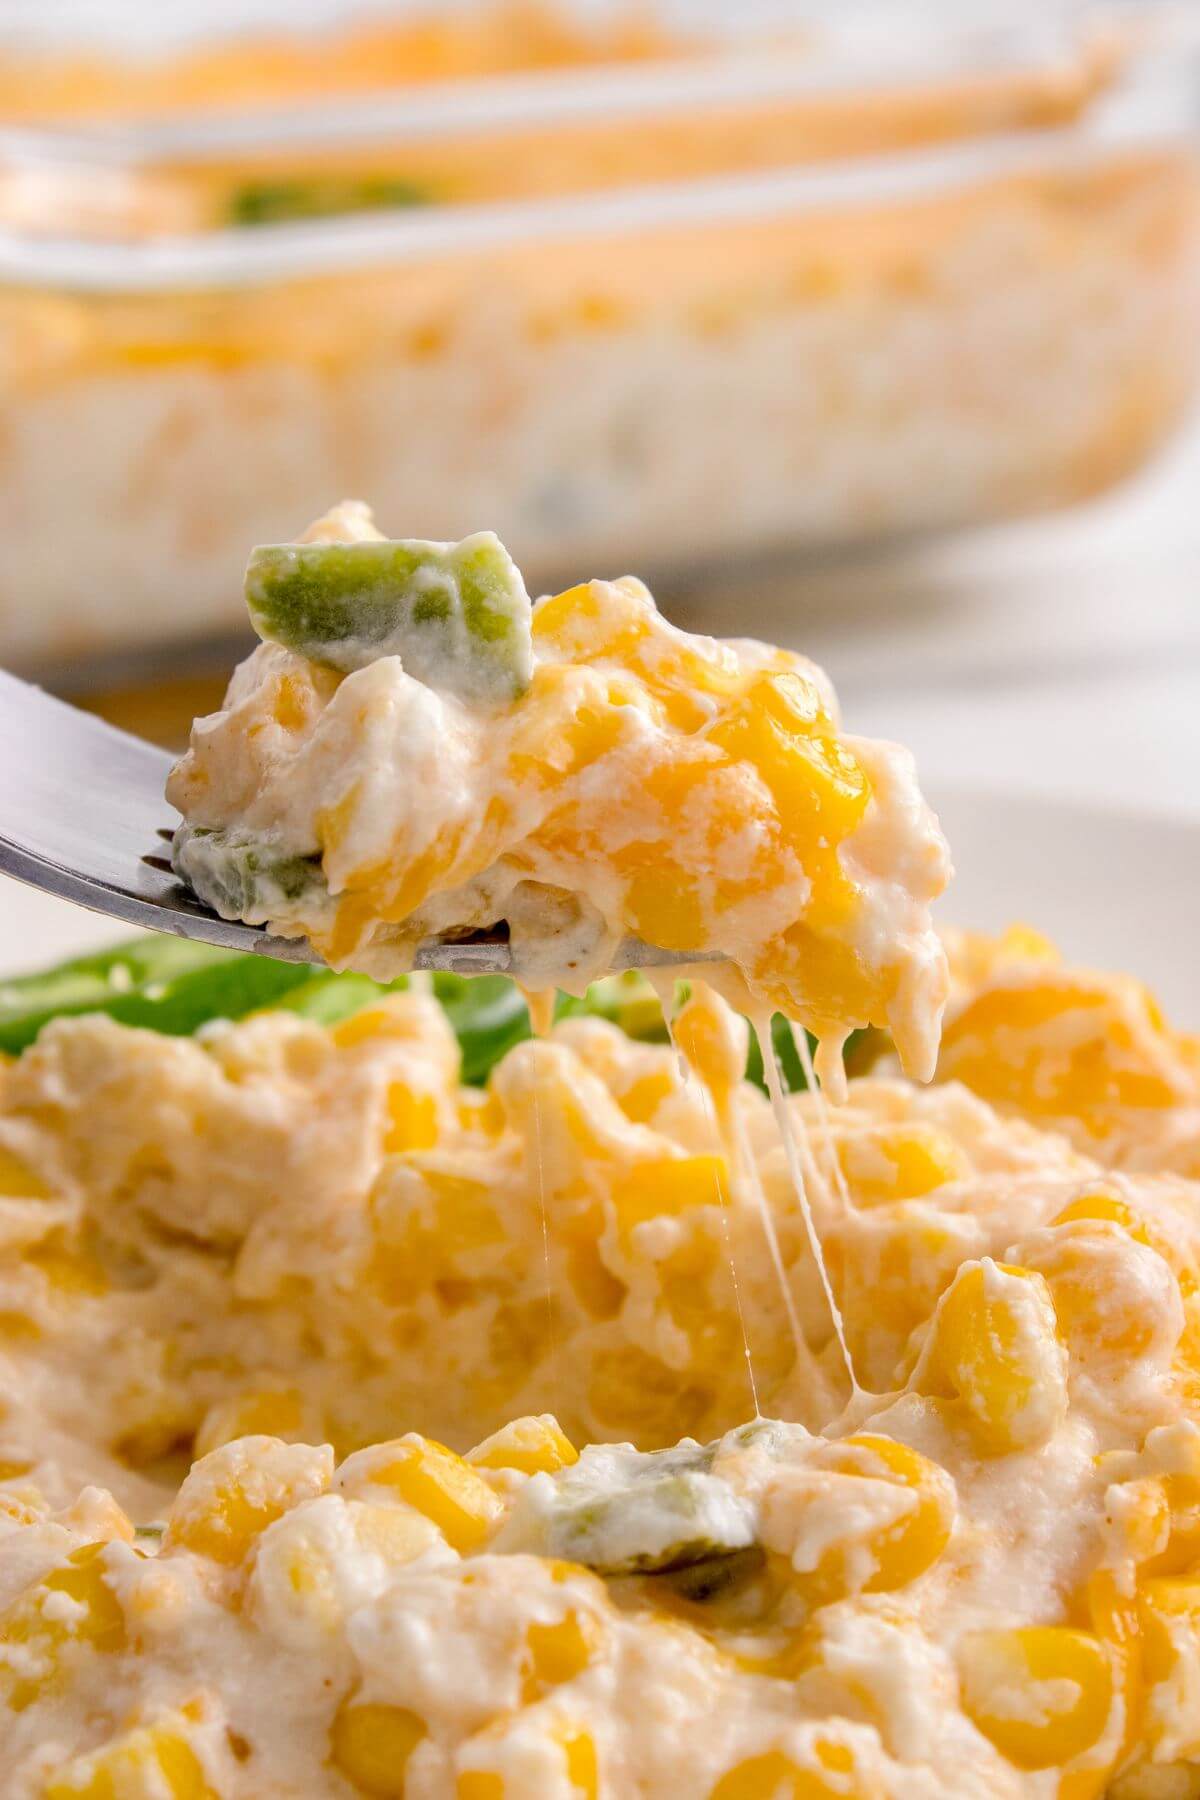 Creamy, cheesy casserole showing diced jalapenos and corn kernels is lifted by a fork.